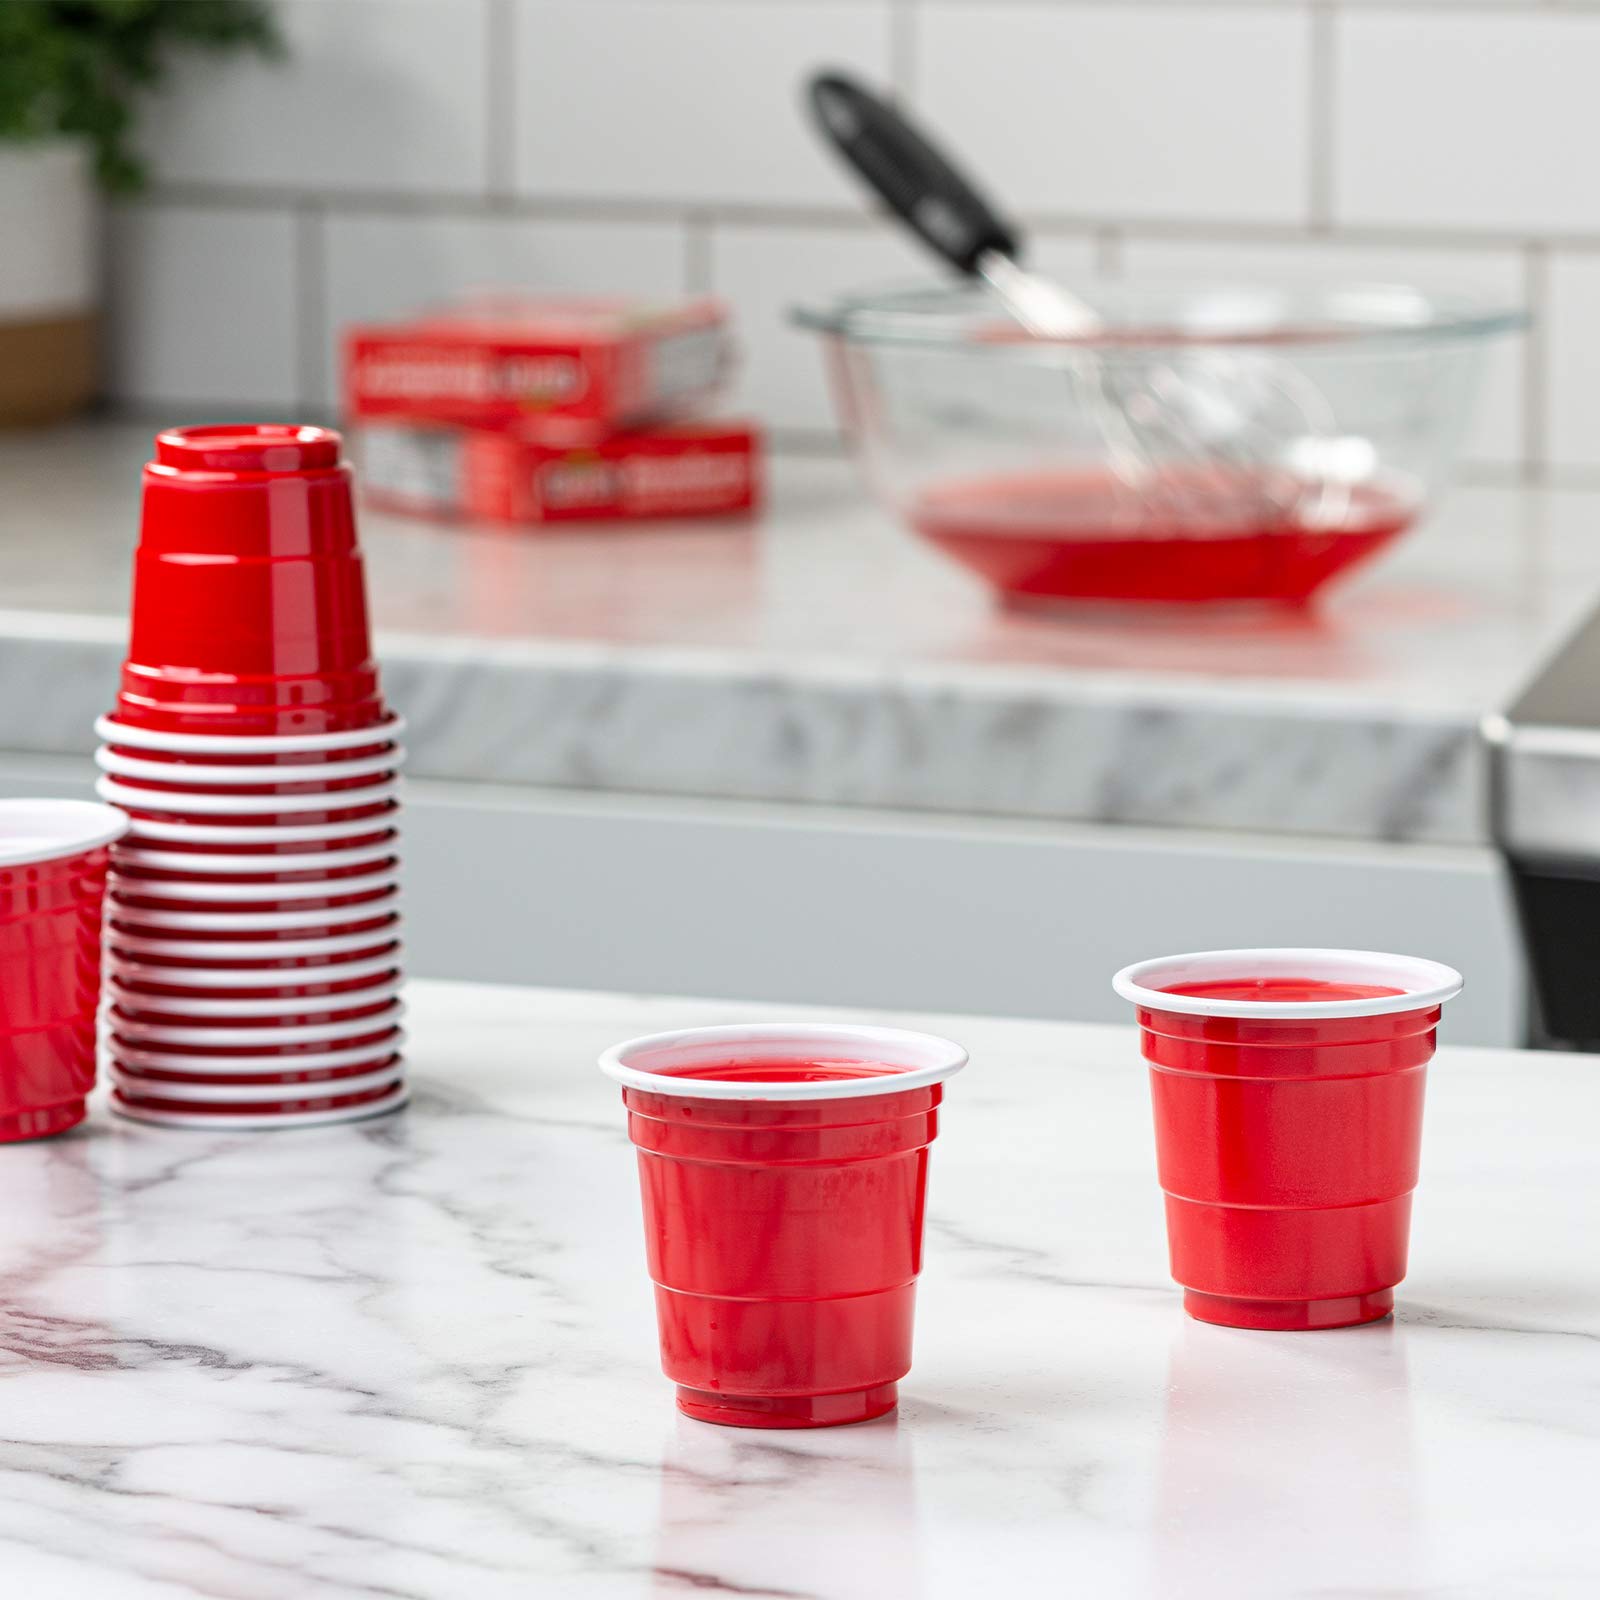 Comfy Package [300 Count] 2 oz. Mini Plastic Shot Glasses - Red Disposable Jello Shot Cups